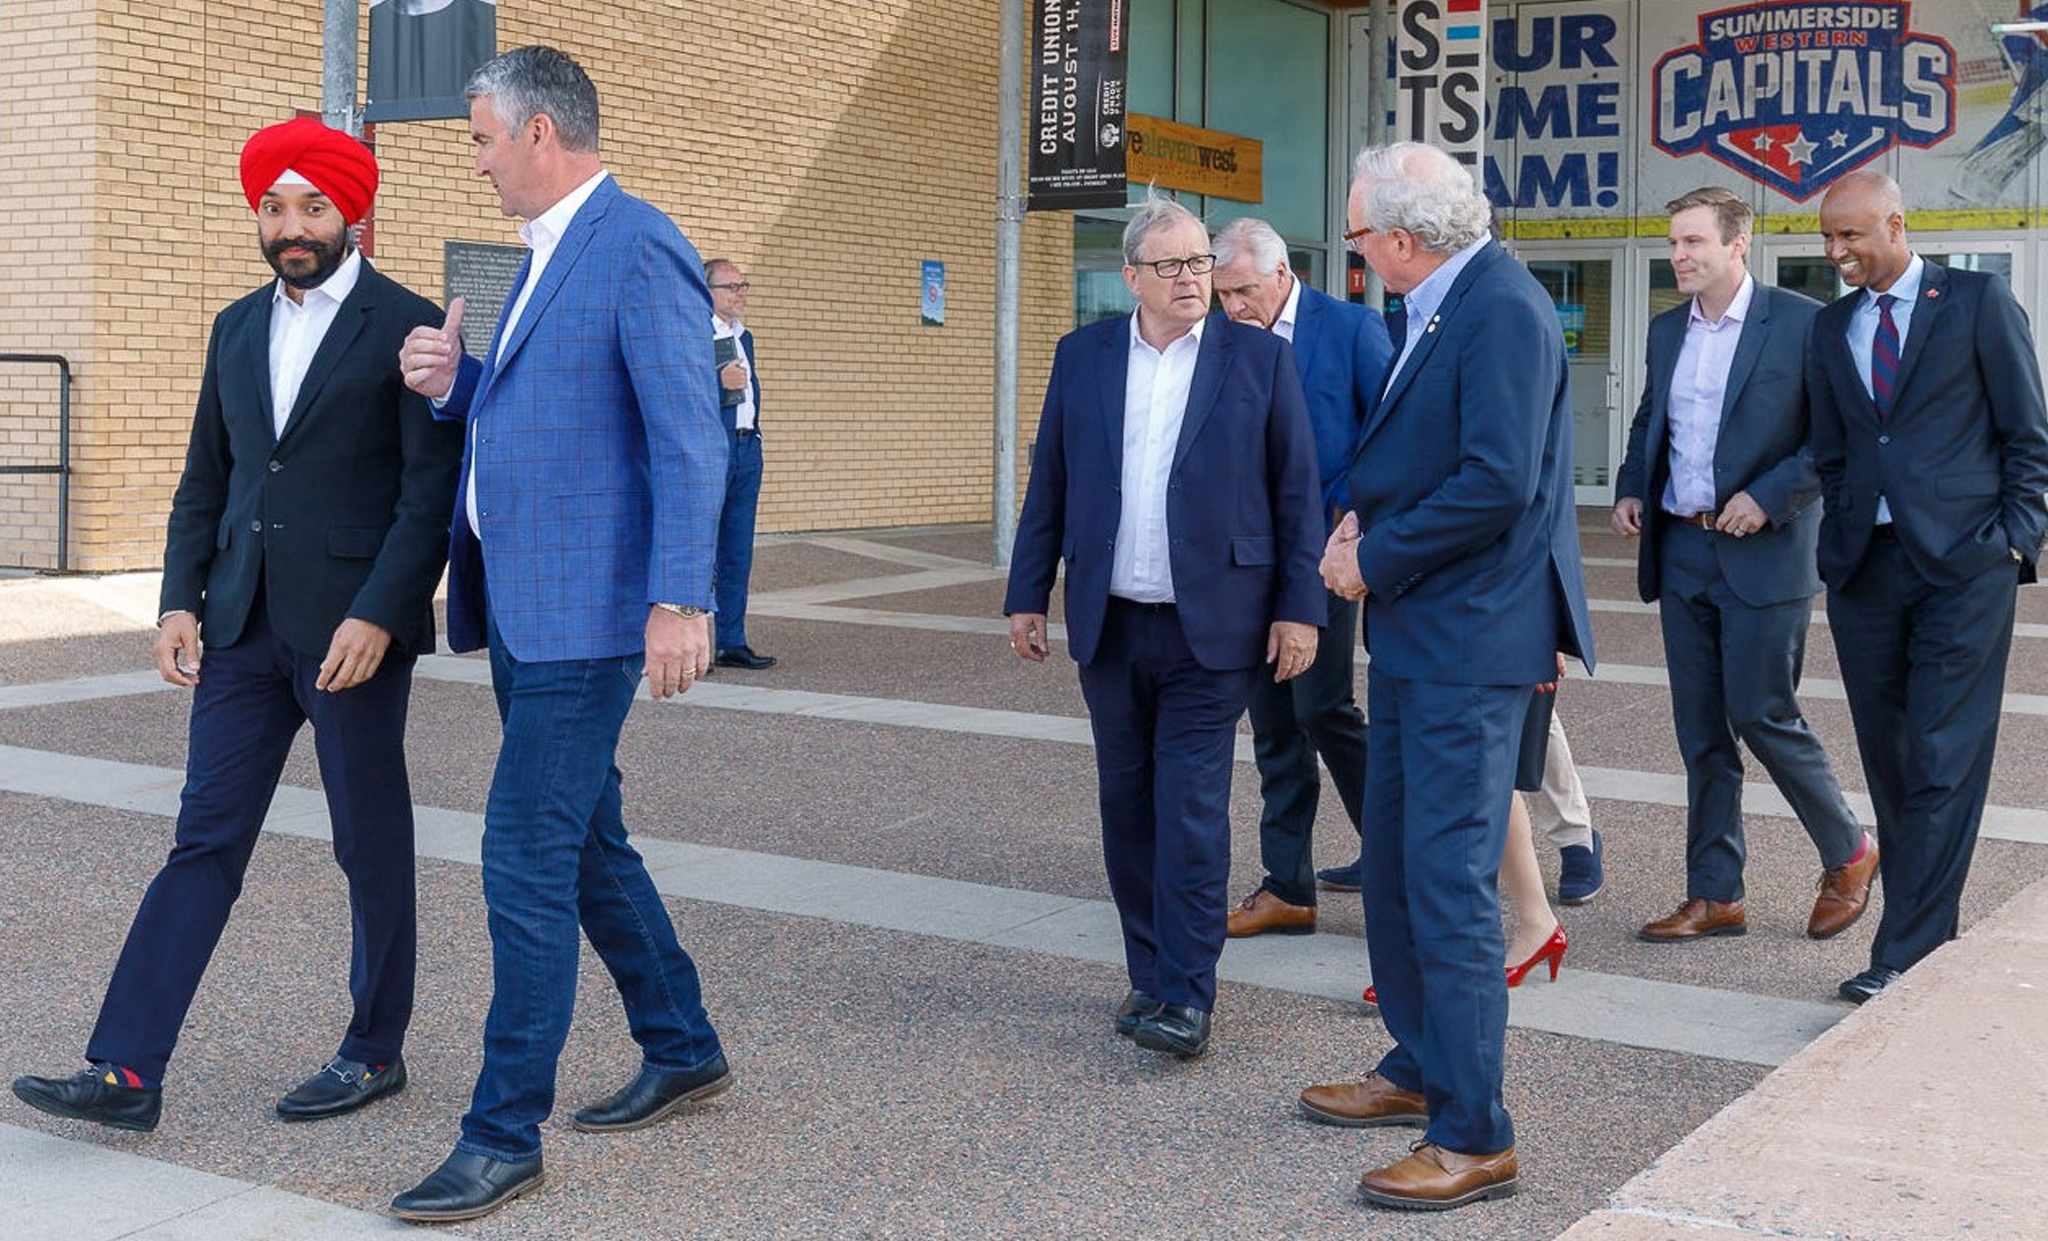 July 10, 2018 - Federal ministers and premiers arrive in Summerside, PEI, for the Atlantic Growth Strategy Leadership Committee meeting to discuss results to date and announce new initiatives.